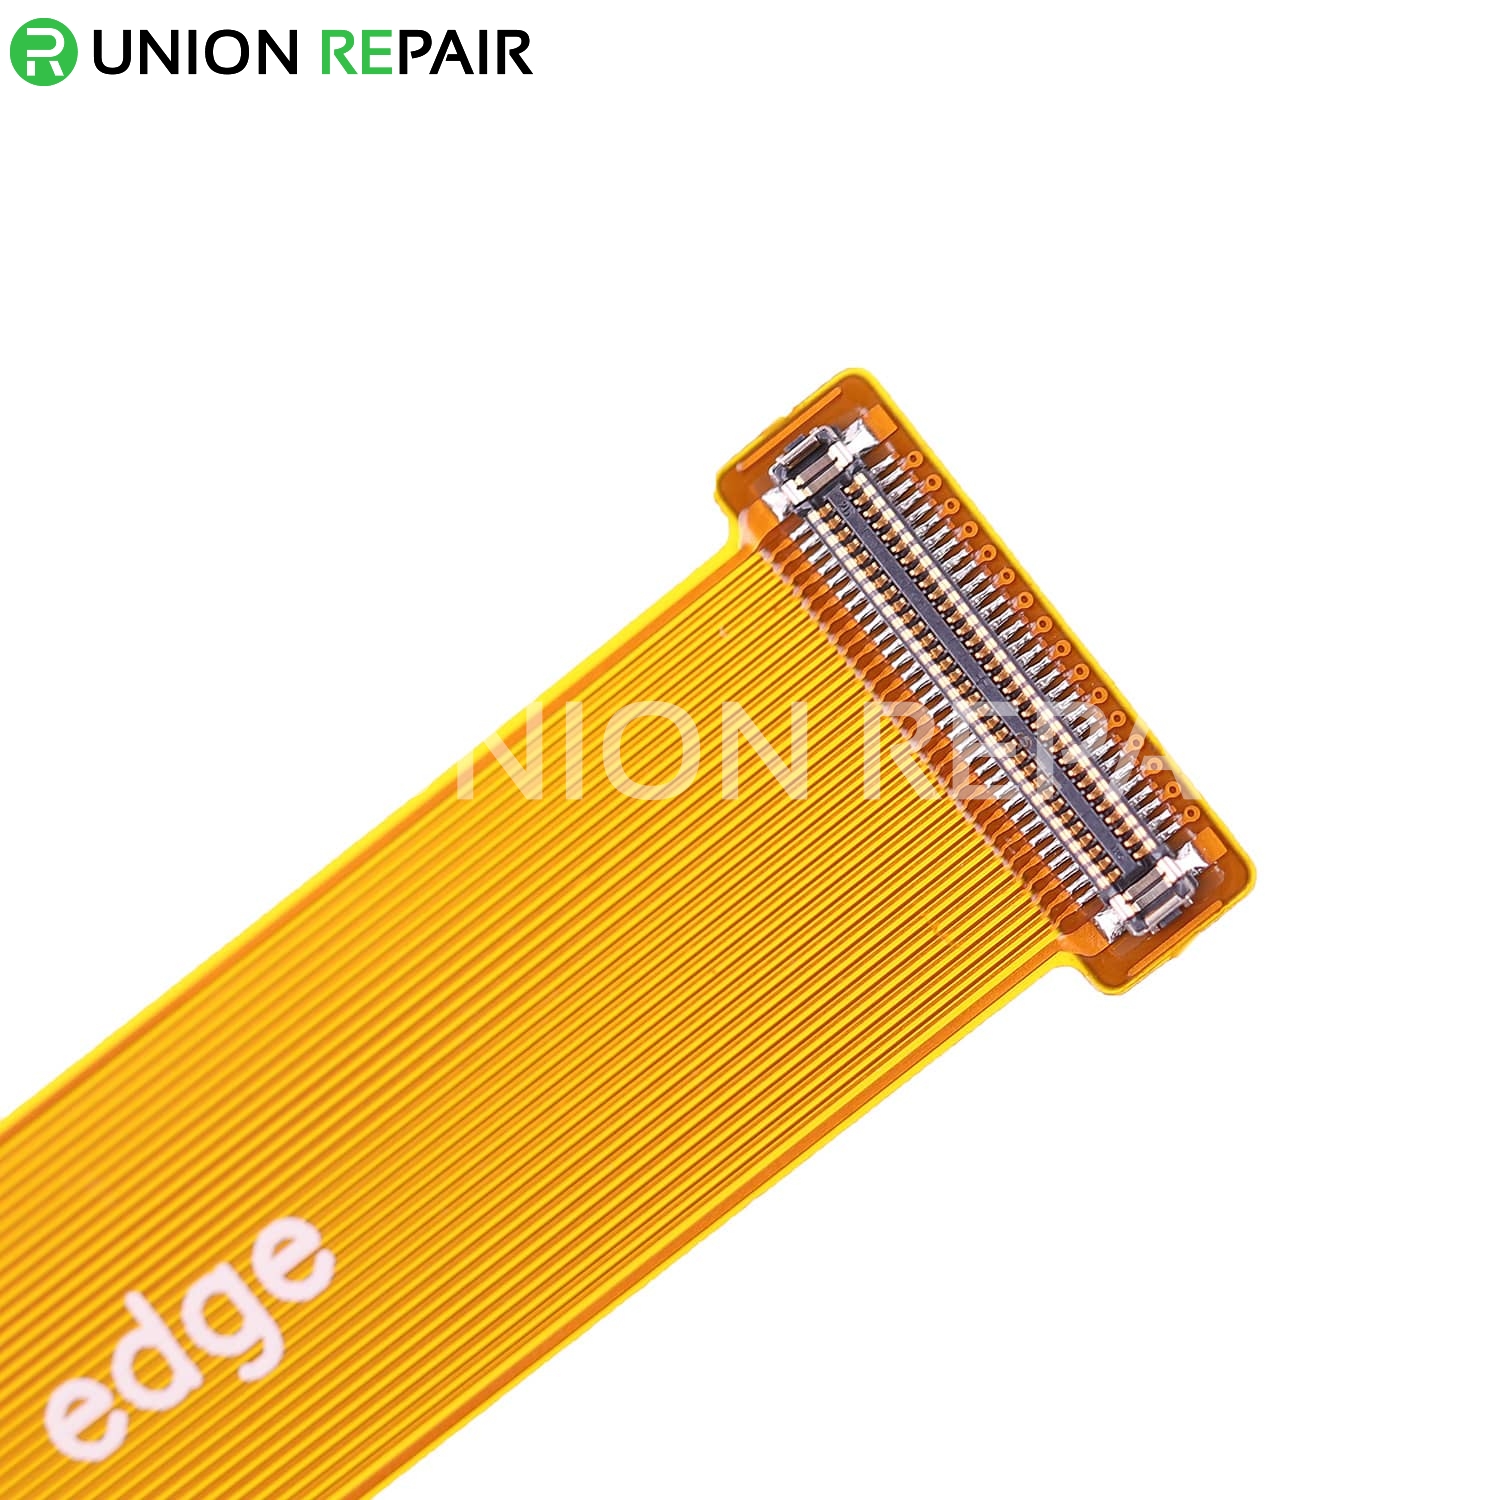 LCD Screen Testing Cable for Samsung Galaxy S8/S8 Plus/S9/S9 Plus/Note 8